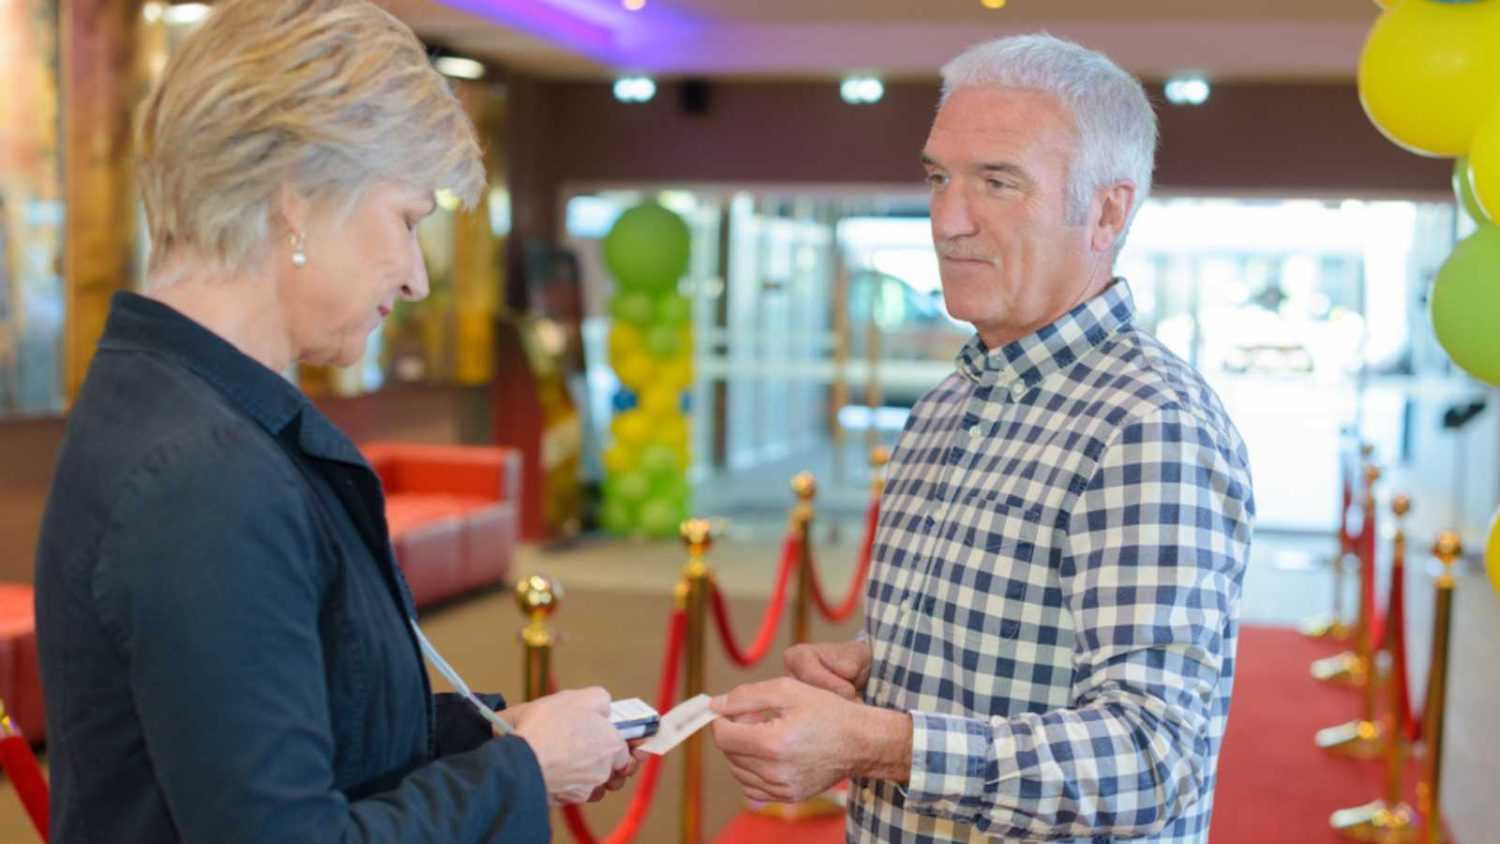 Man giving tickets to Woman